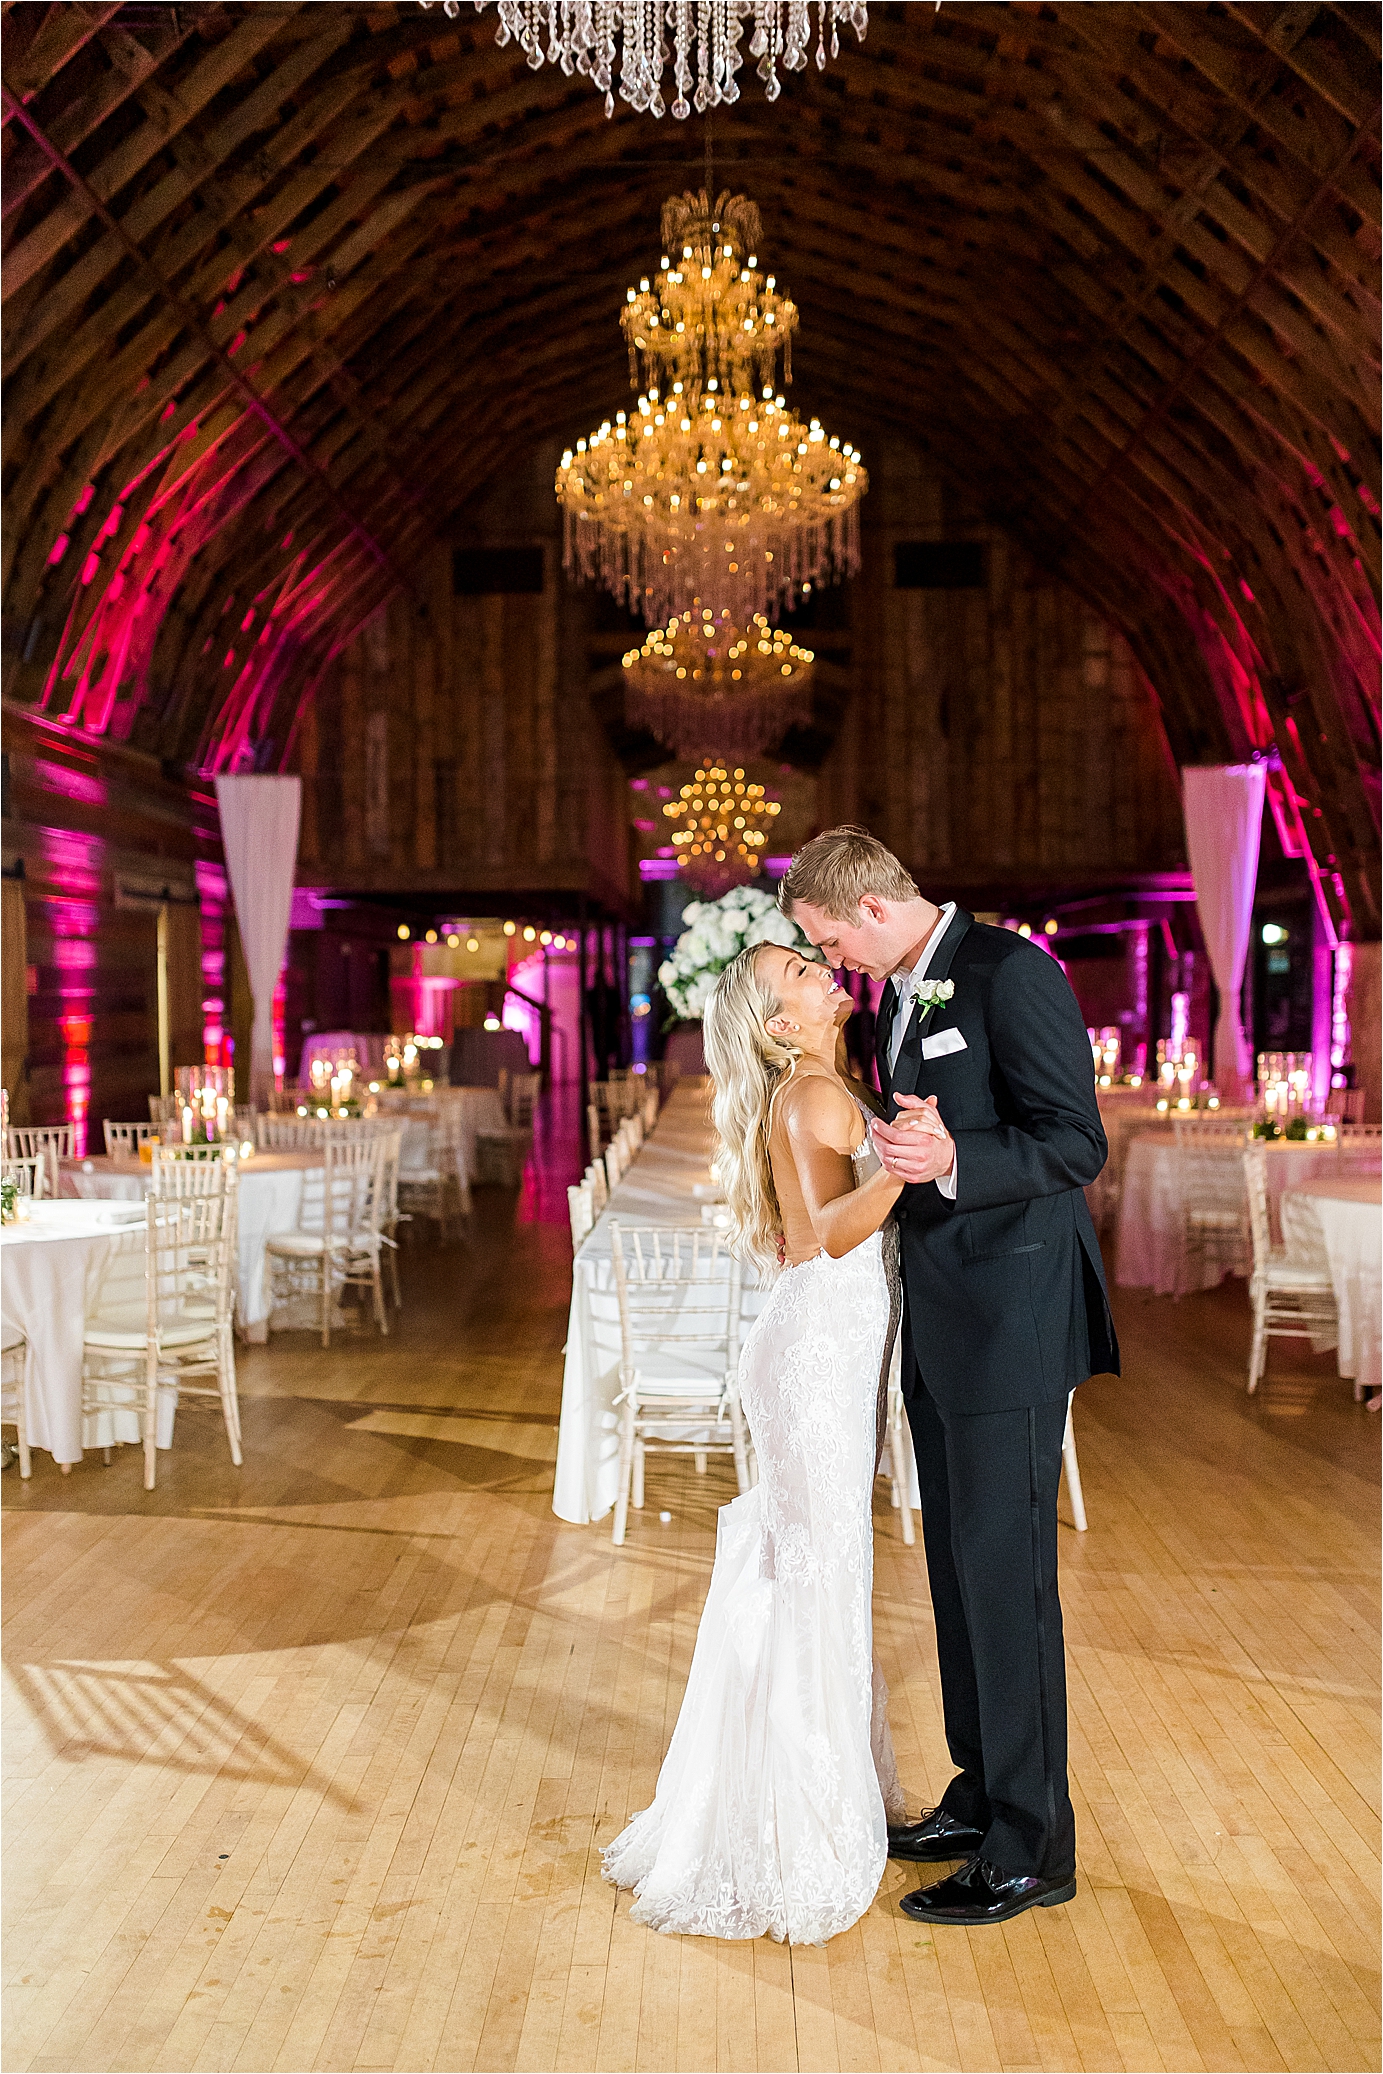 A bride and groom share a private last dance with chandeliers and pink lights surrounding them as they nuzzle close to wrap up their barn style wedding reception at Brodie Homestead in Austin, Texas